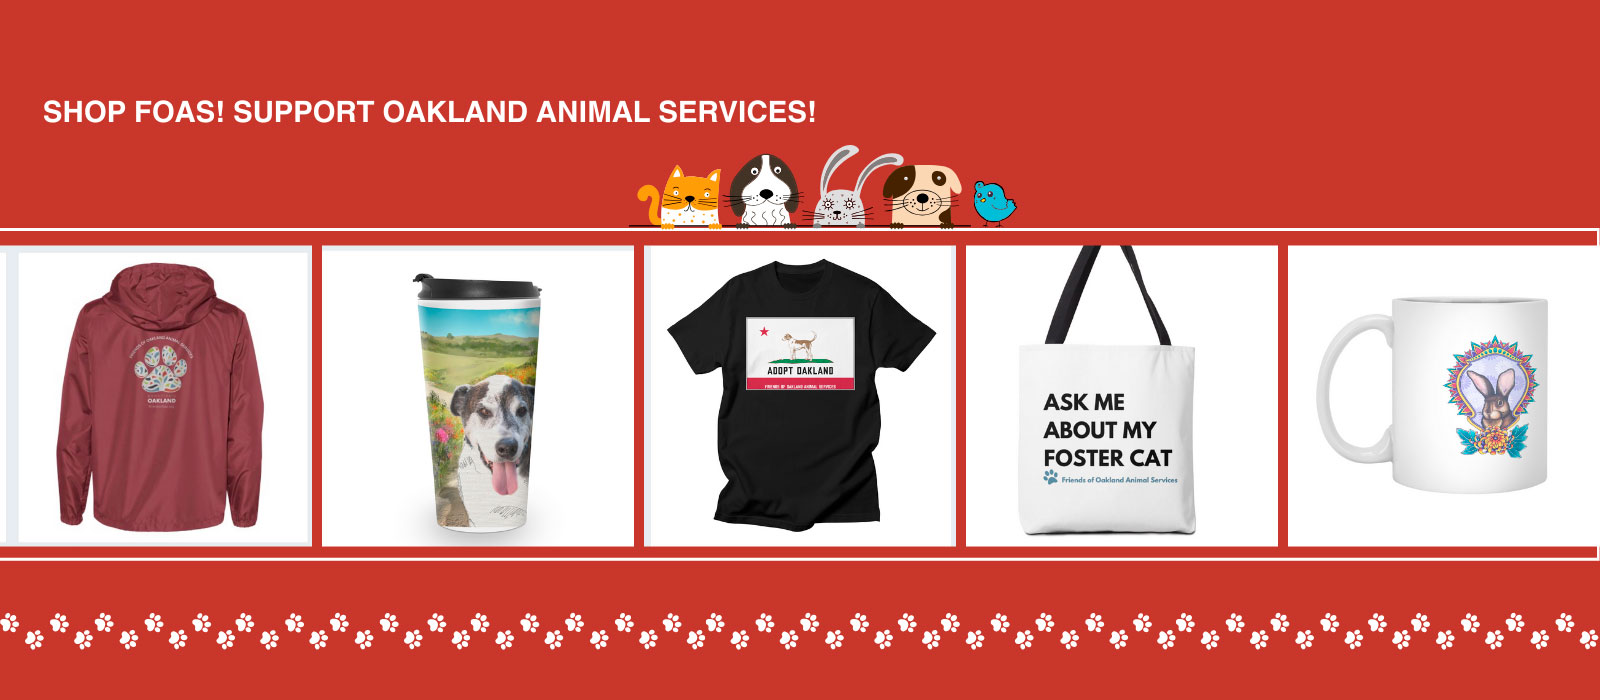 Shop FOAS stores and support Oakland’s animals!